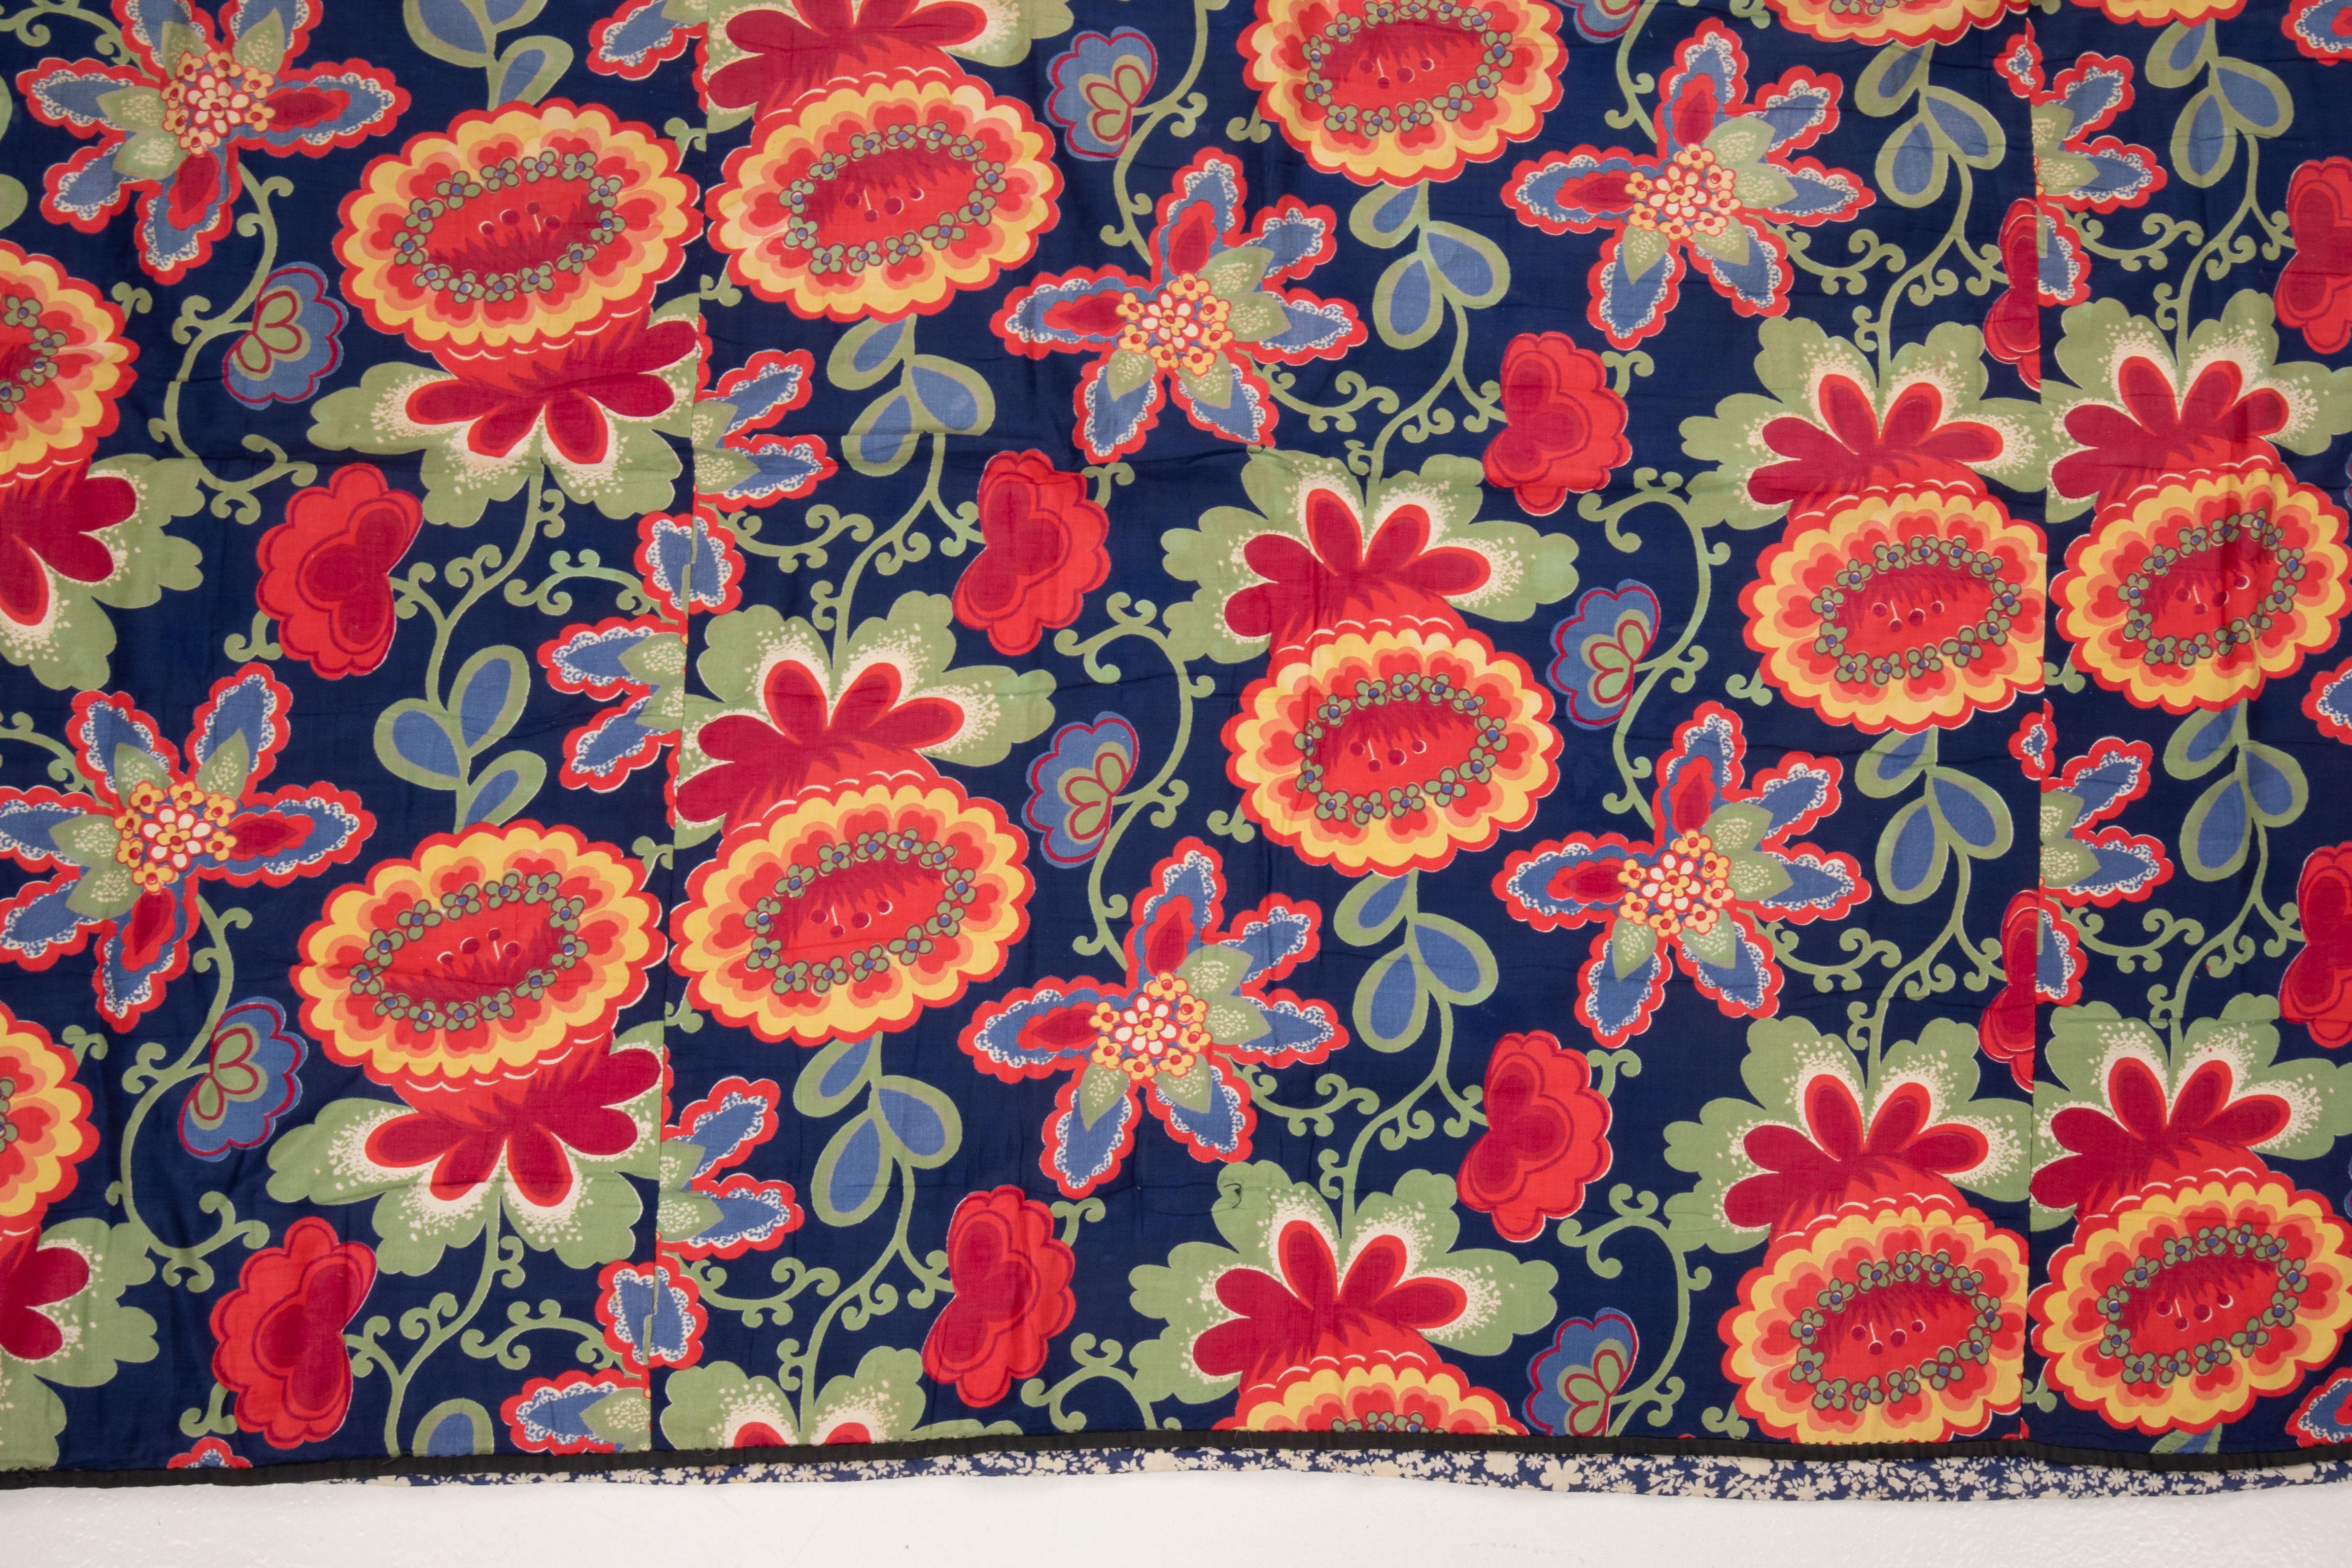 Russian roller-printed textiles from the mid-20th century held a distinctive place in the Central Asian market, embodying a vibrant fusion of artistic expression and utilitarian functionality. These textiles were characterized by their intricate and